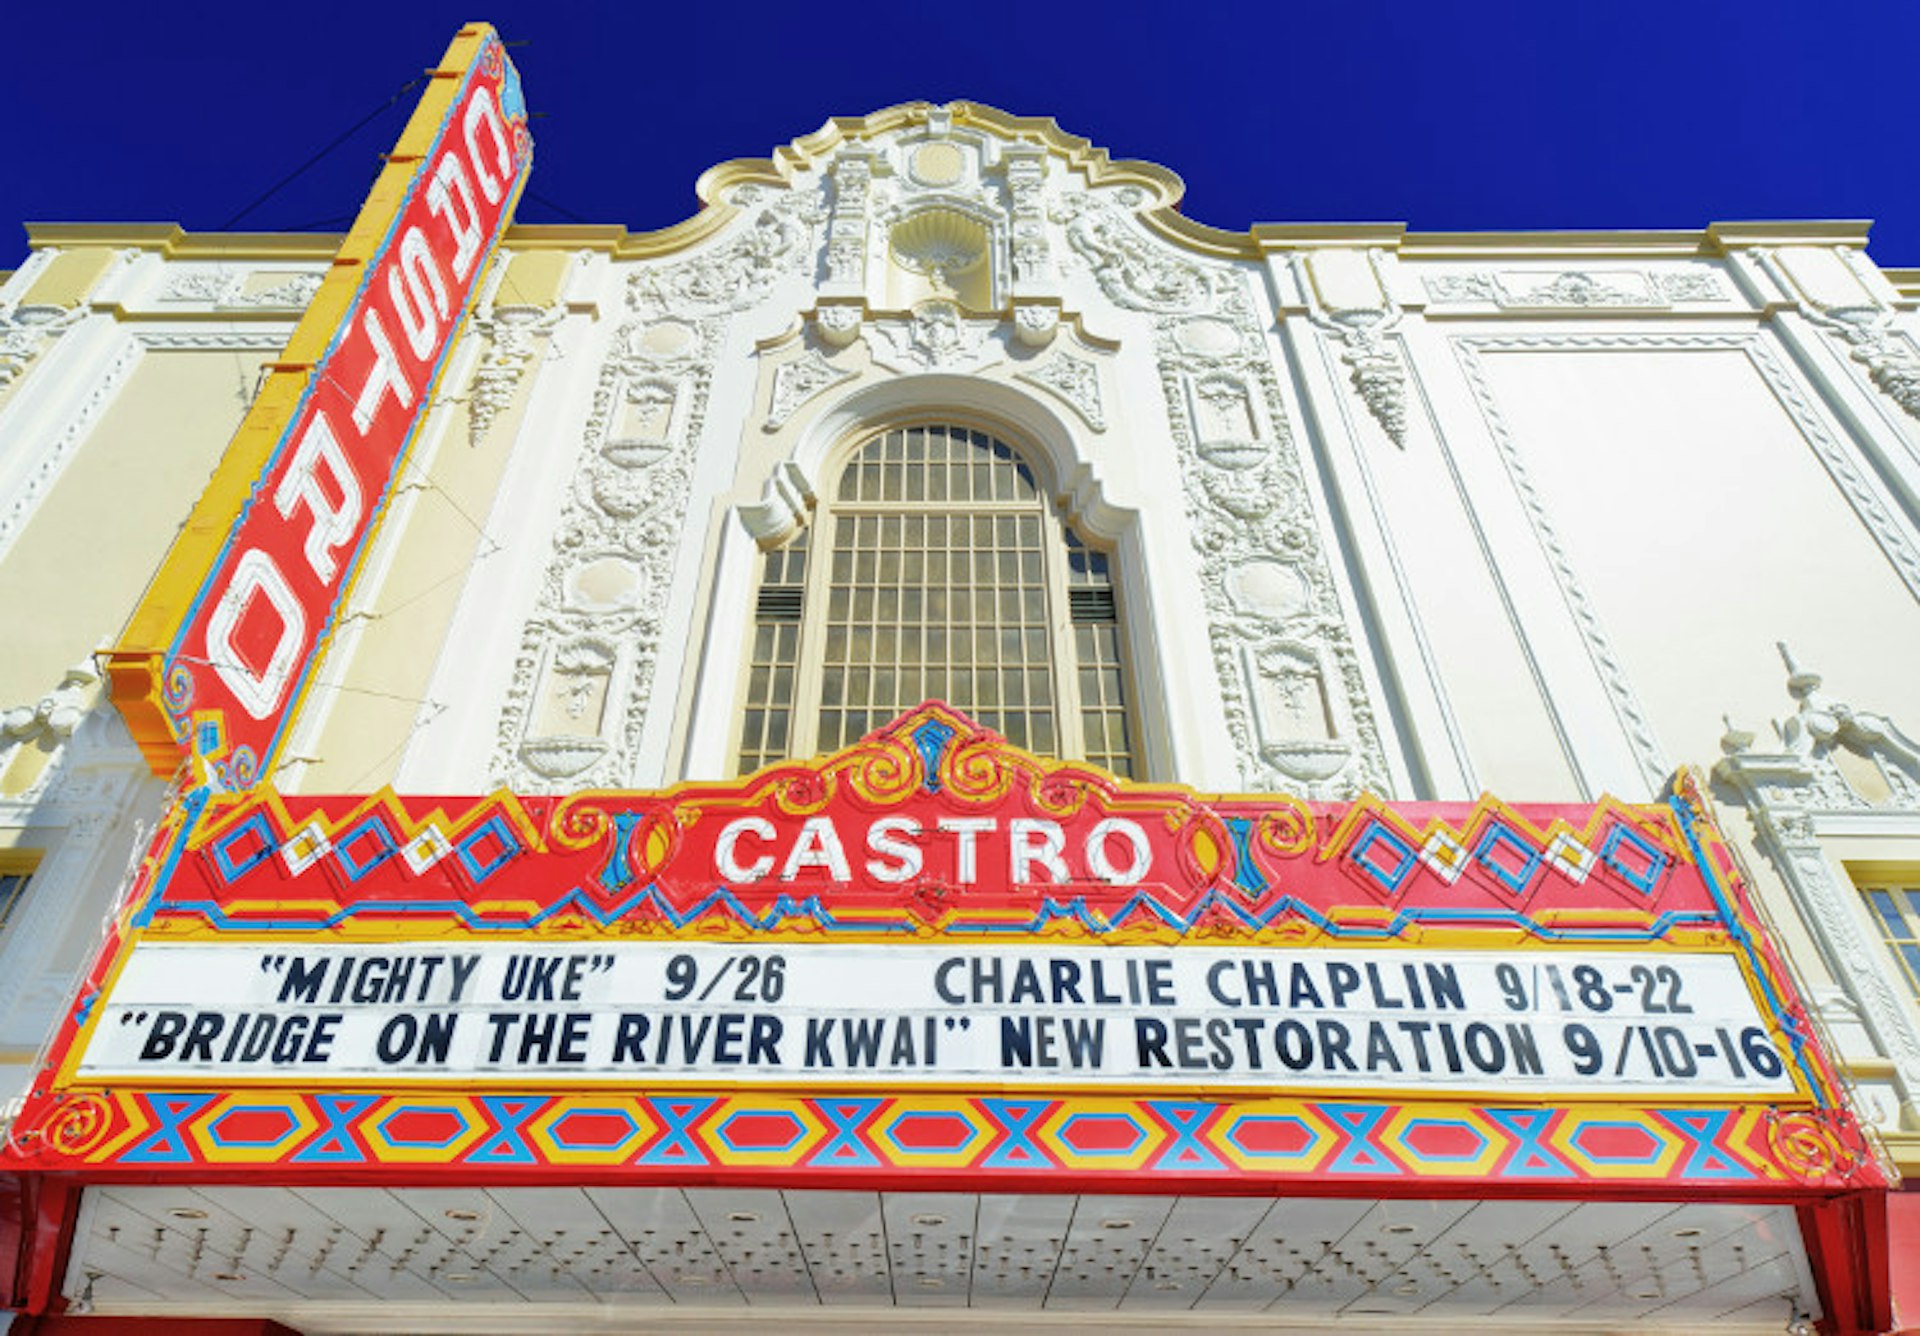 Take in a show at the Castro Theater. Image by Mitchell Funk / Photographer's Choice / Getty